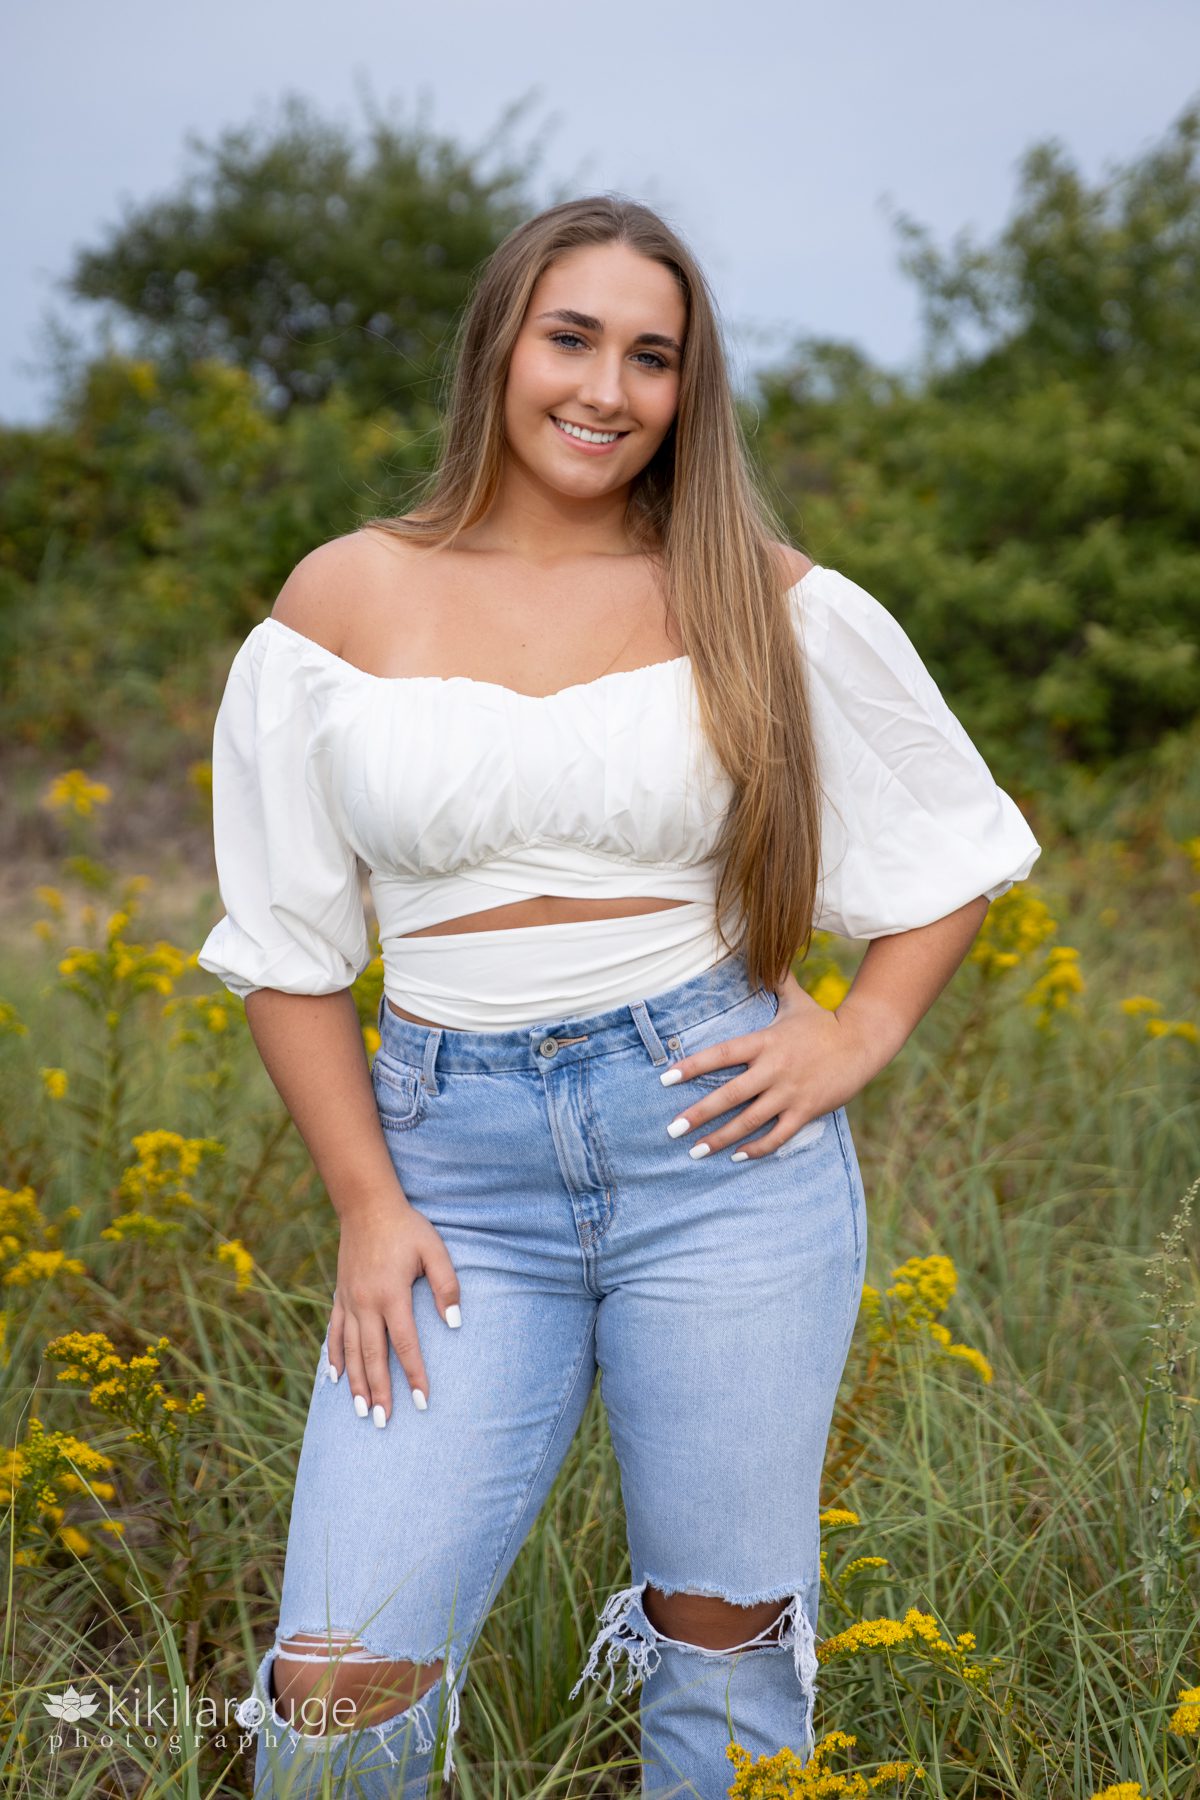 Triton Senior Portrait Girl in Jeans with white top tied in back at beach in goldenrods